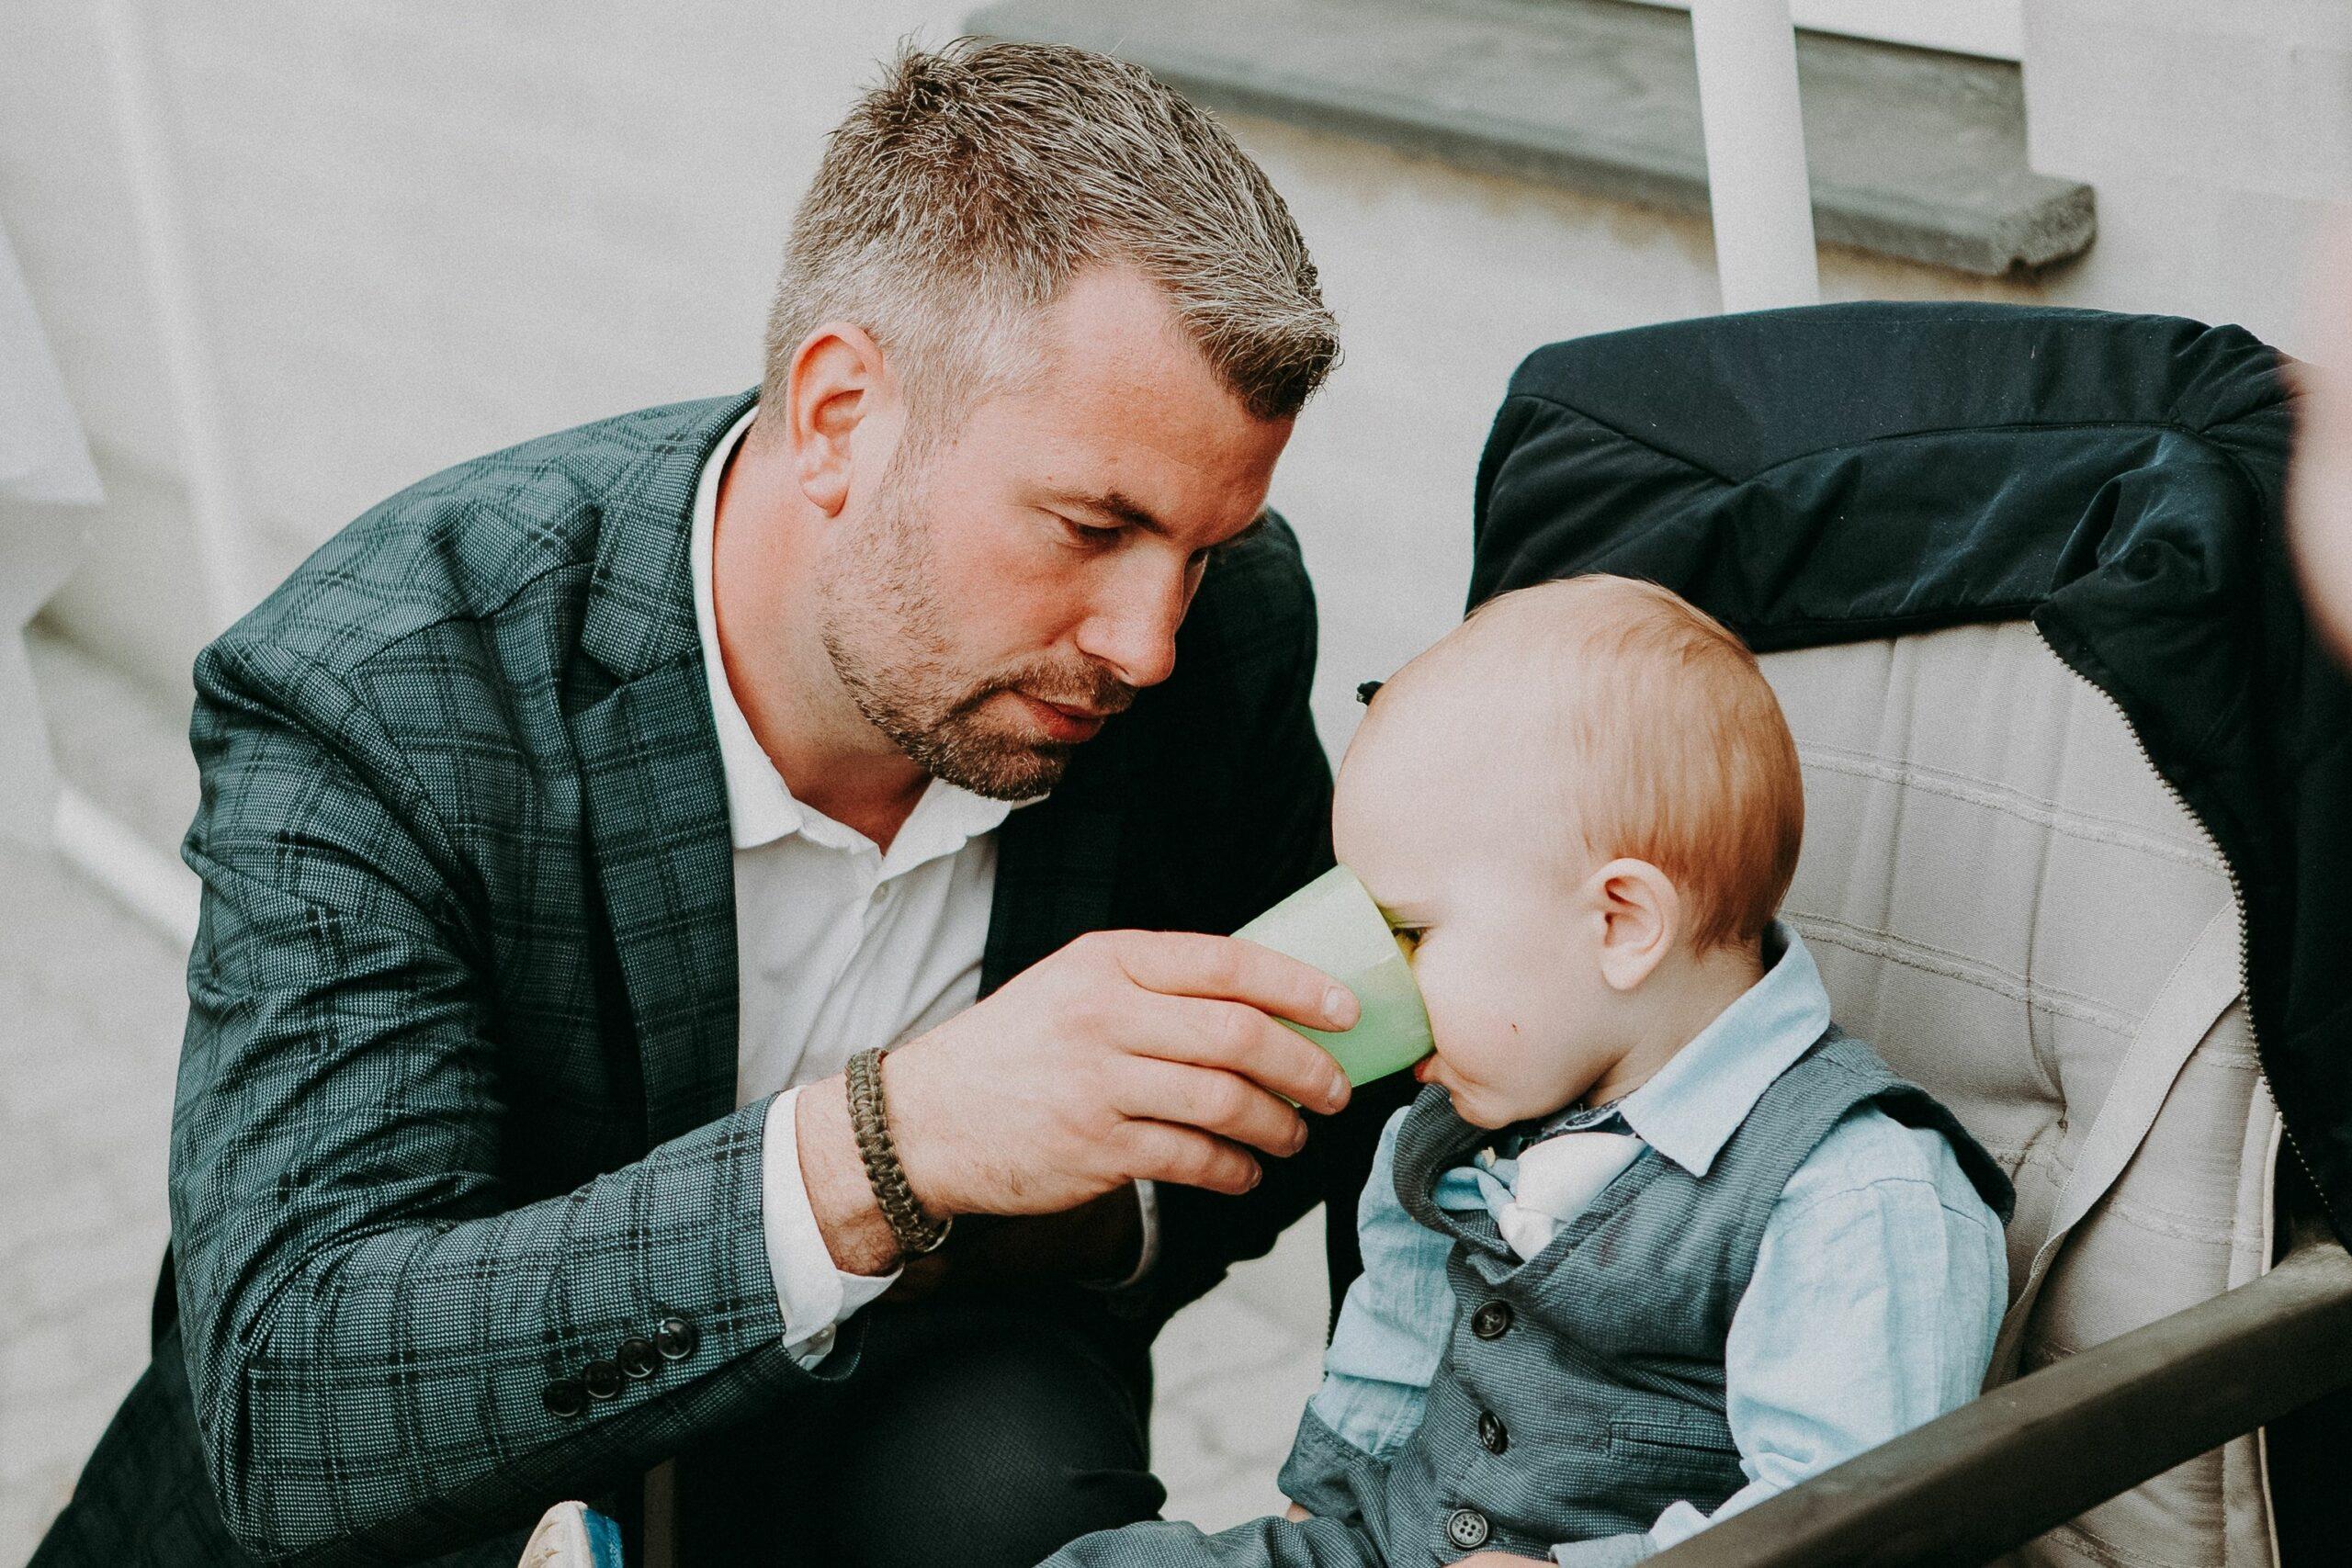 Father giving little child beverage in cup